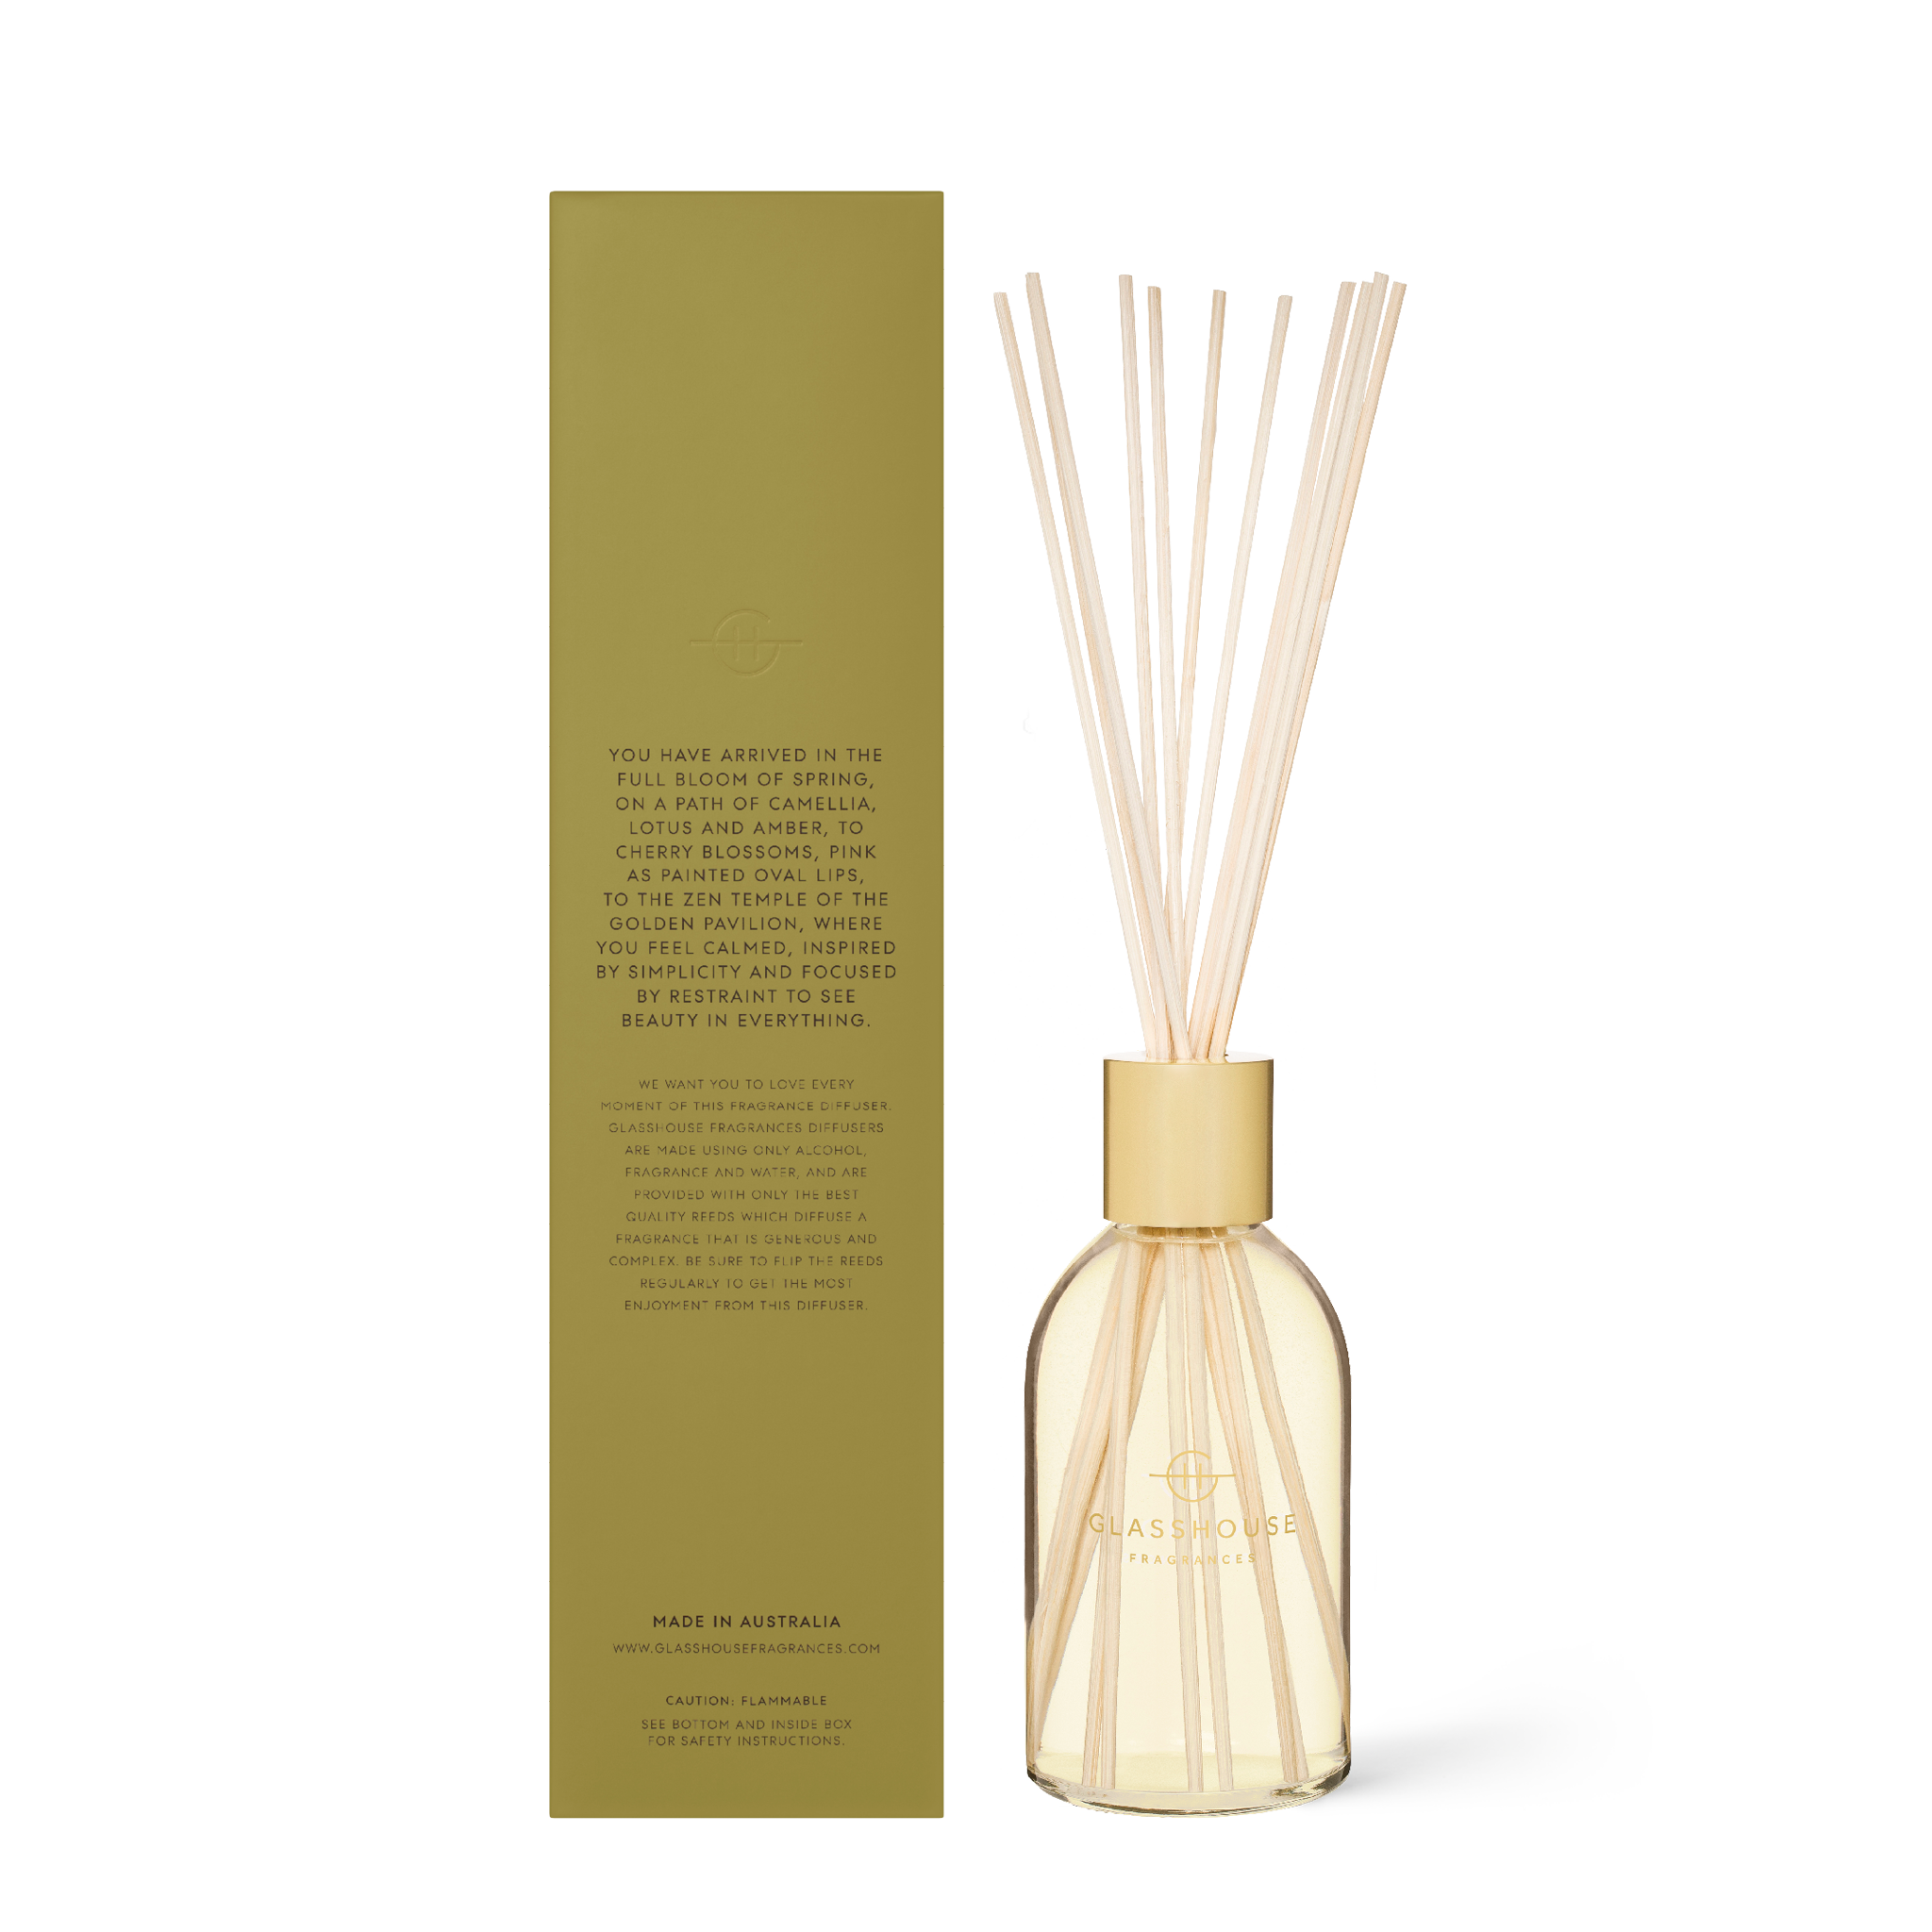 Glasshouse Fragrances Kyoto in Bloom Camellia and Lotus 250mL Scent Diffuser with box - back of product shot